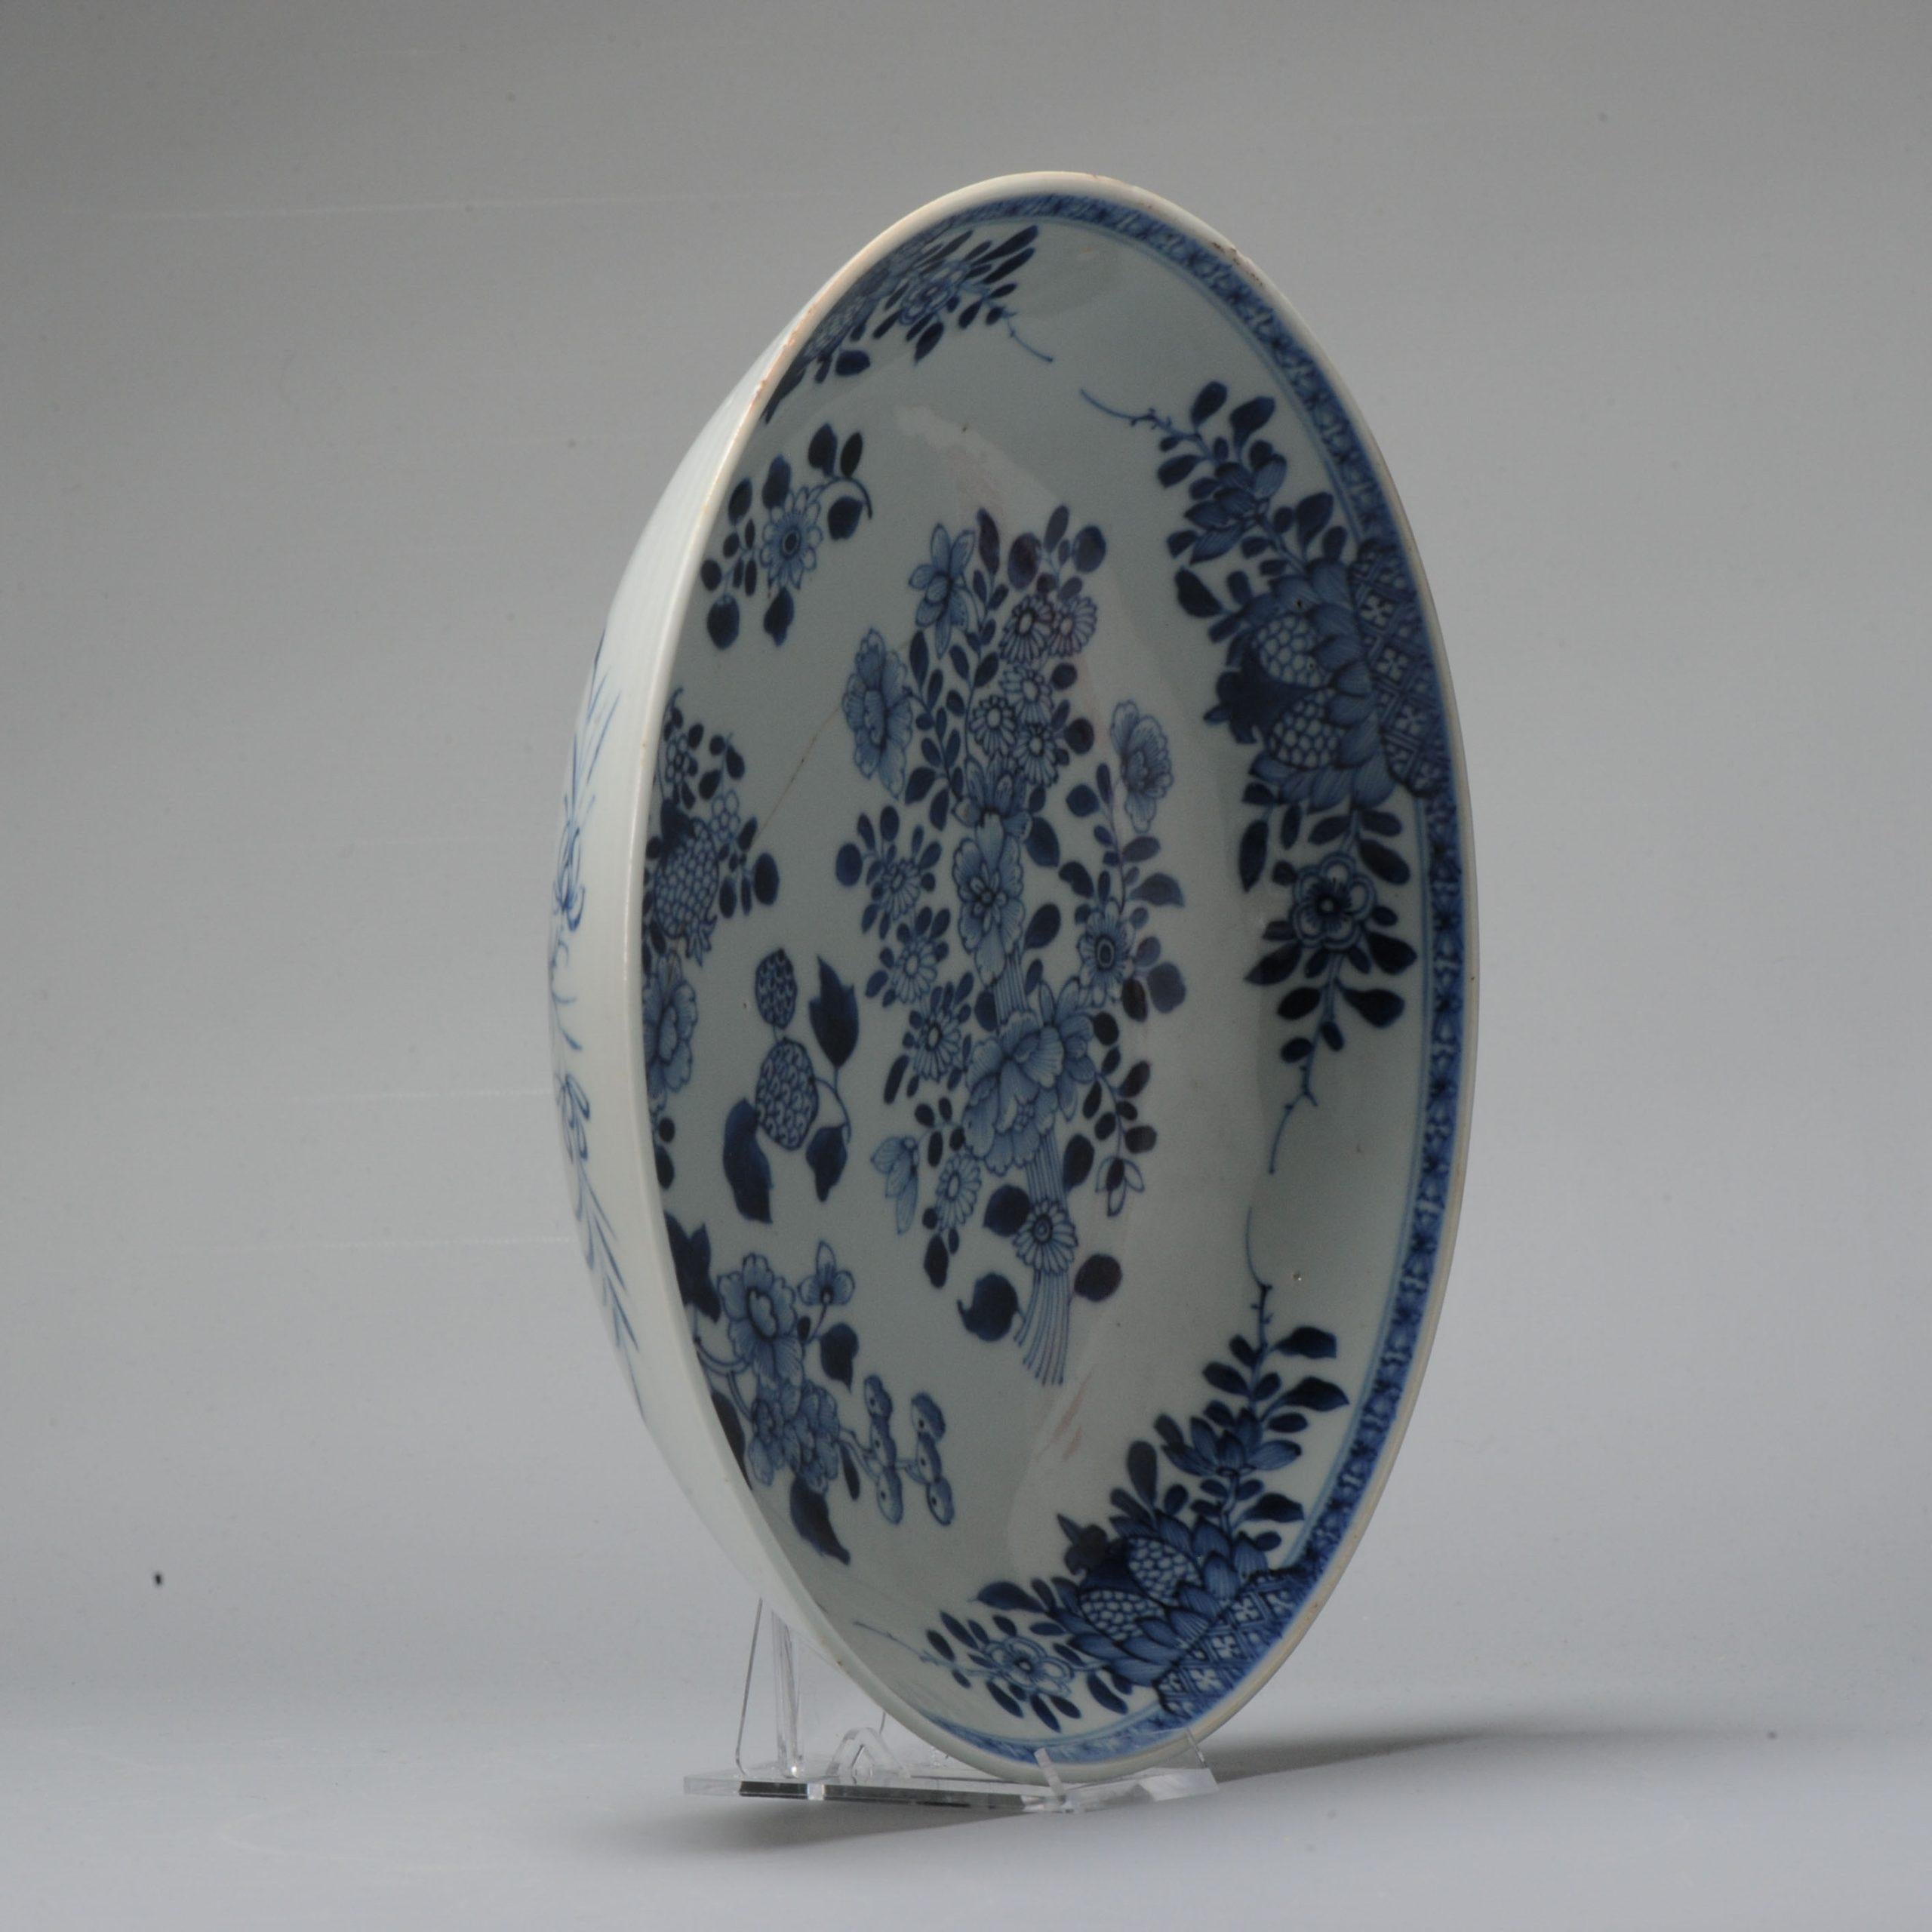 A very nice, richly decorated deep plate.

Additional information:
Material: Porcelain & Pottery
Type: Plates
Color: Blue & White
Region of Origin: China
Emperor: Qianlong (1735-1796)
Period: 18th century Qing (1661 - 1912)
Age: Pre-1800
Condition: